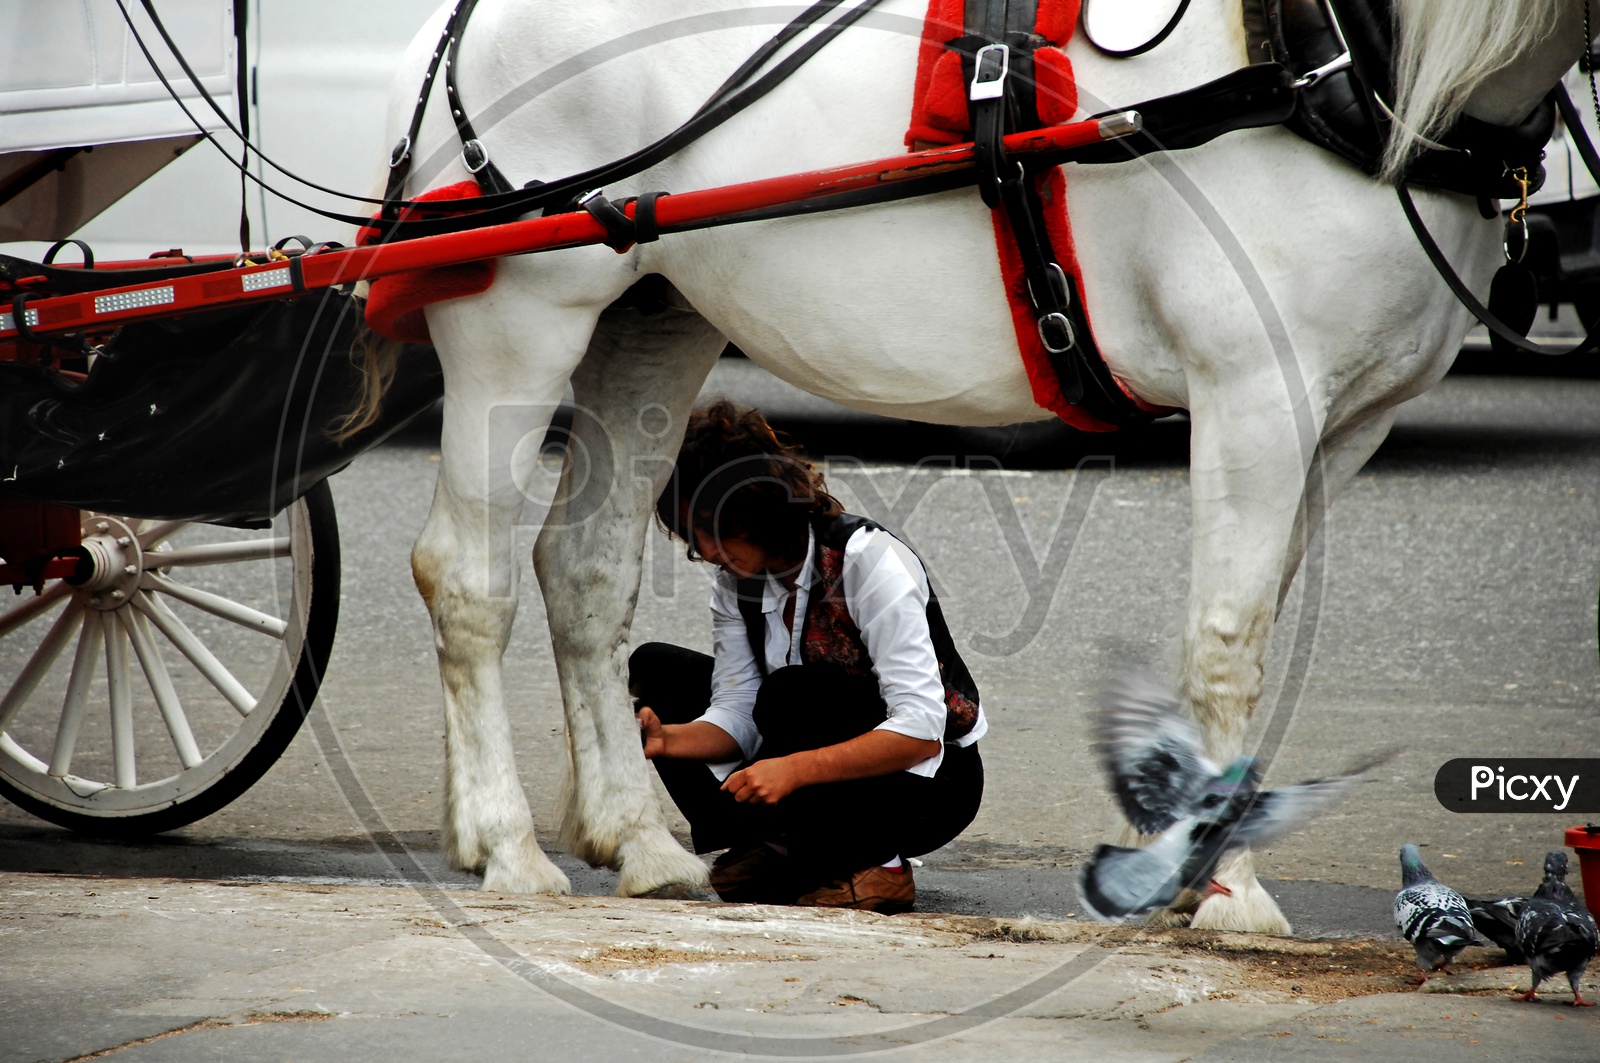 A Woman checking the horse legs